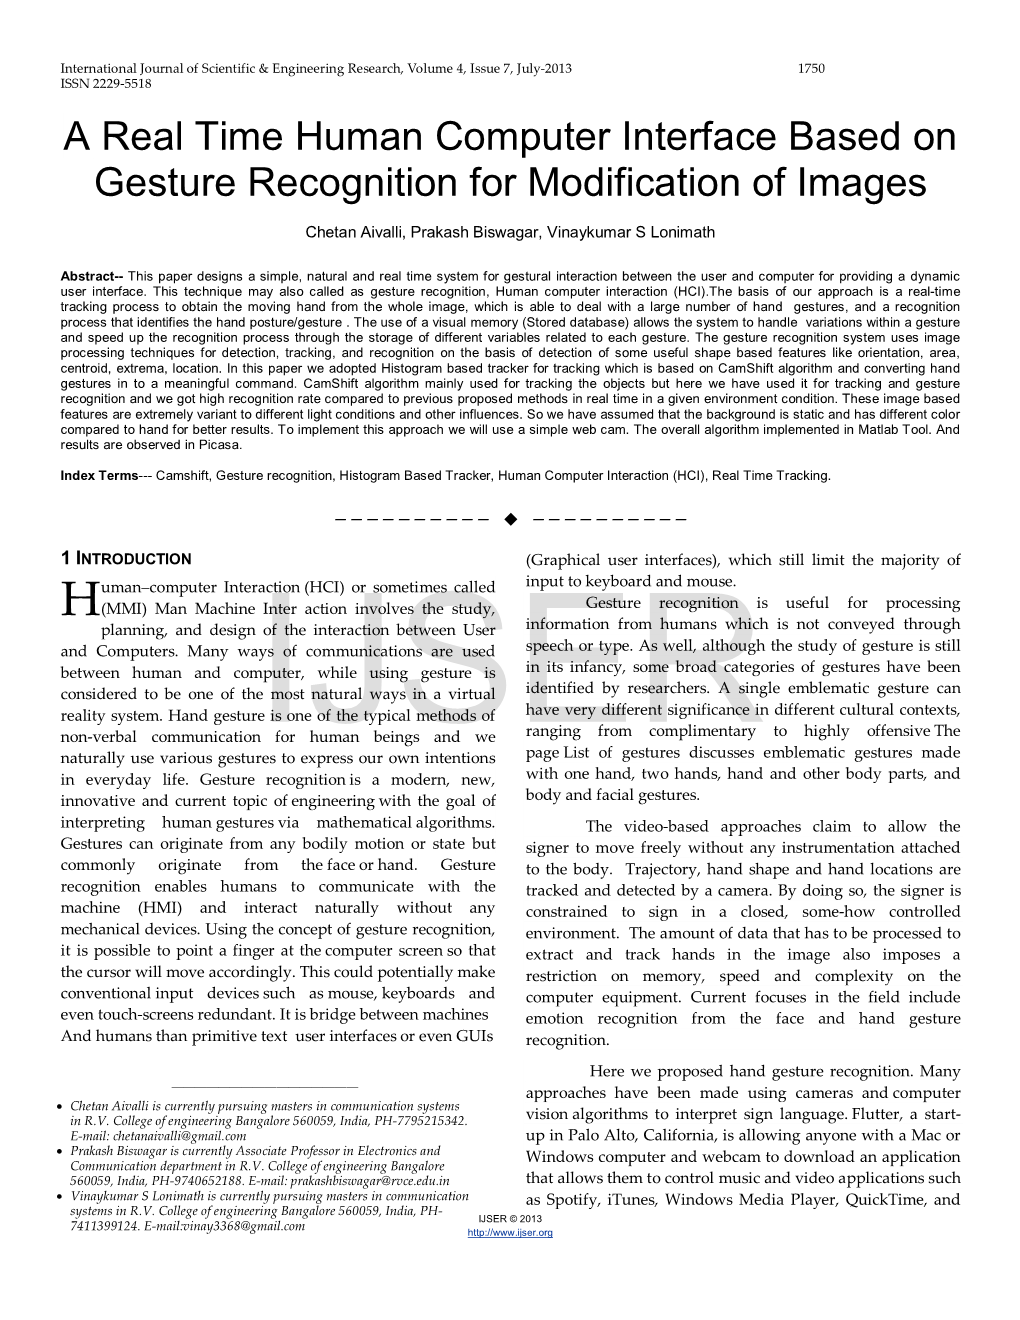 A Real Time Human Computer Interface Based on Gesture Recognition for Modification of Images